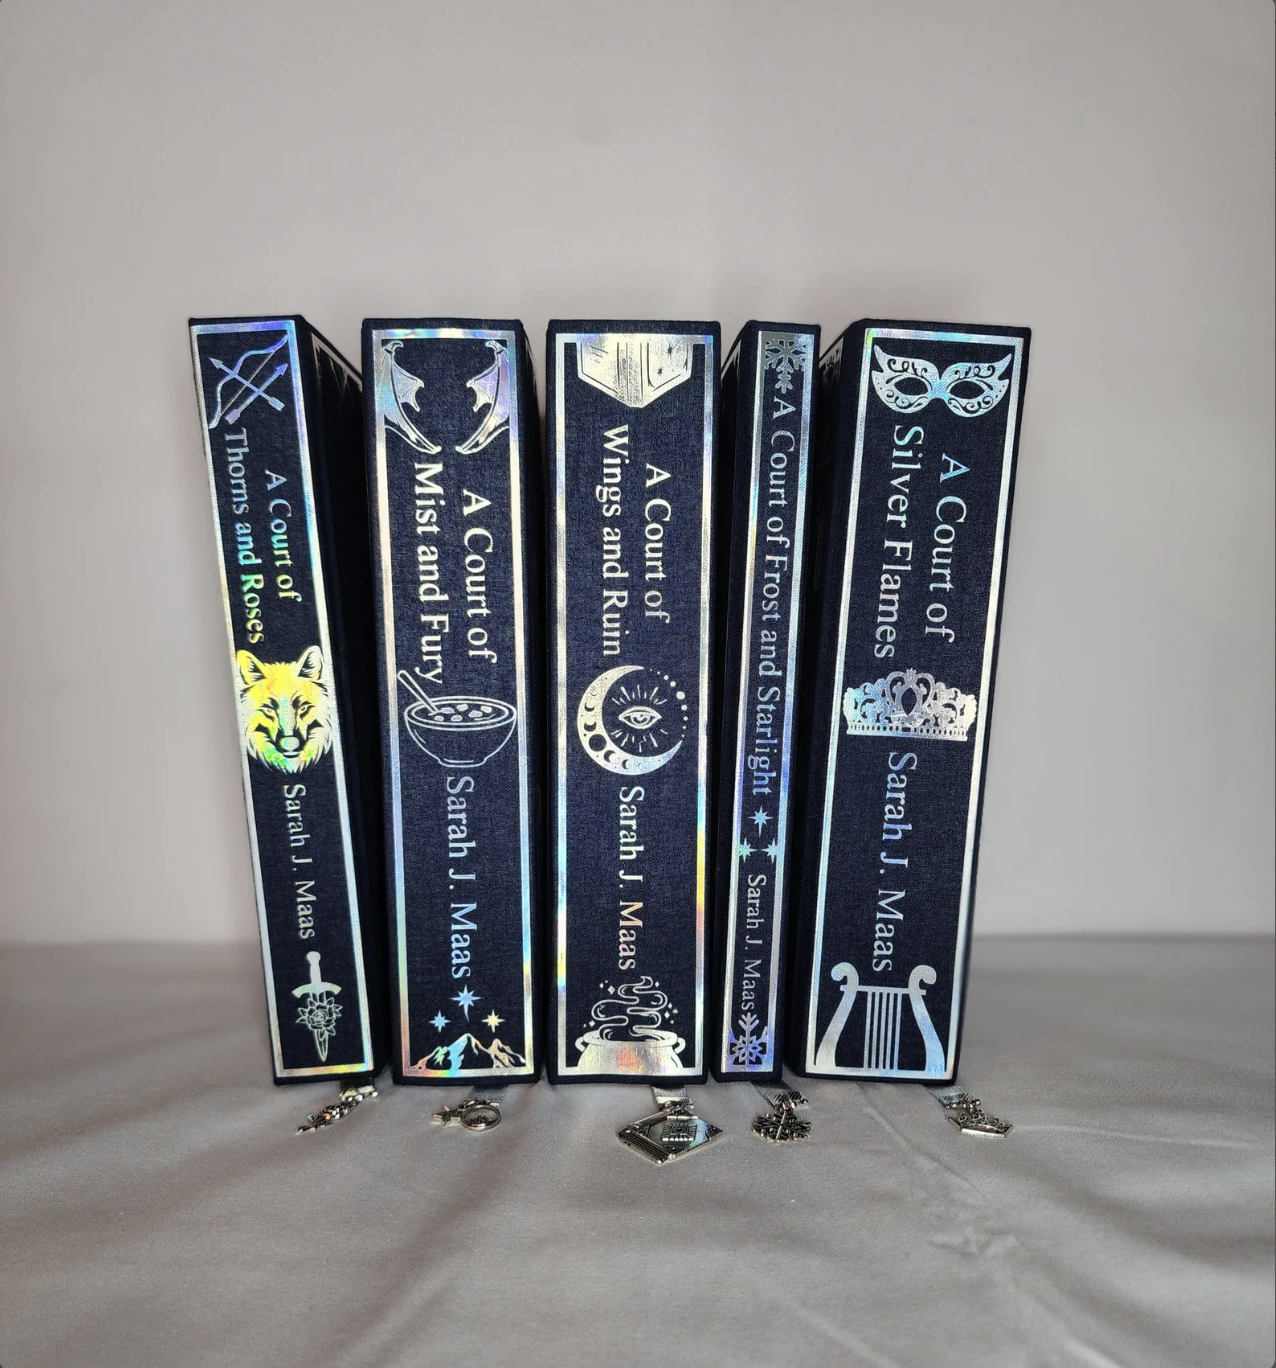 The ACOTAR book spines